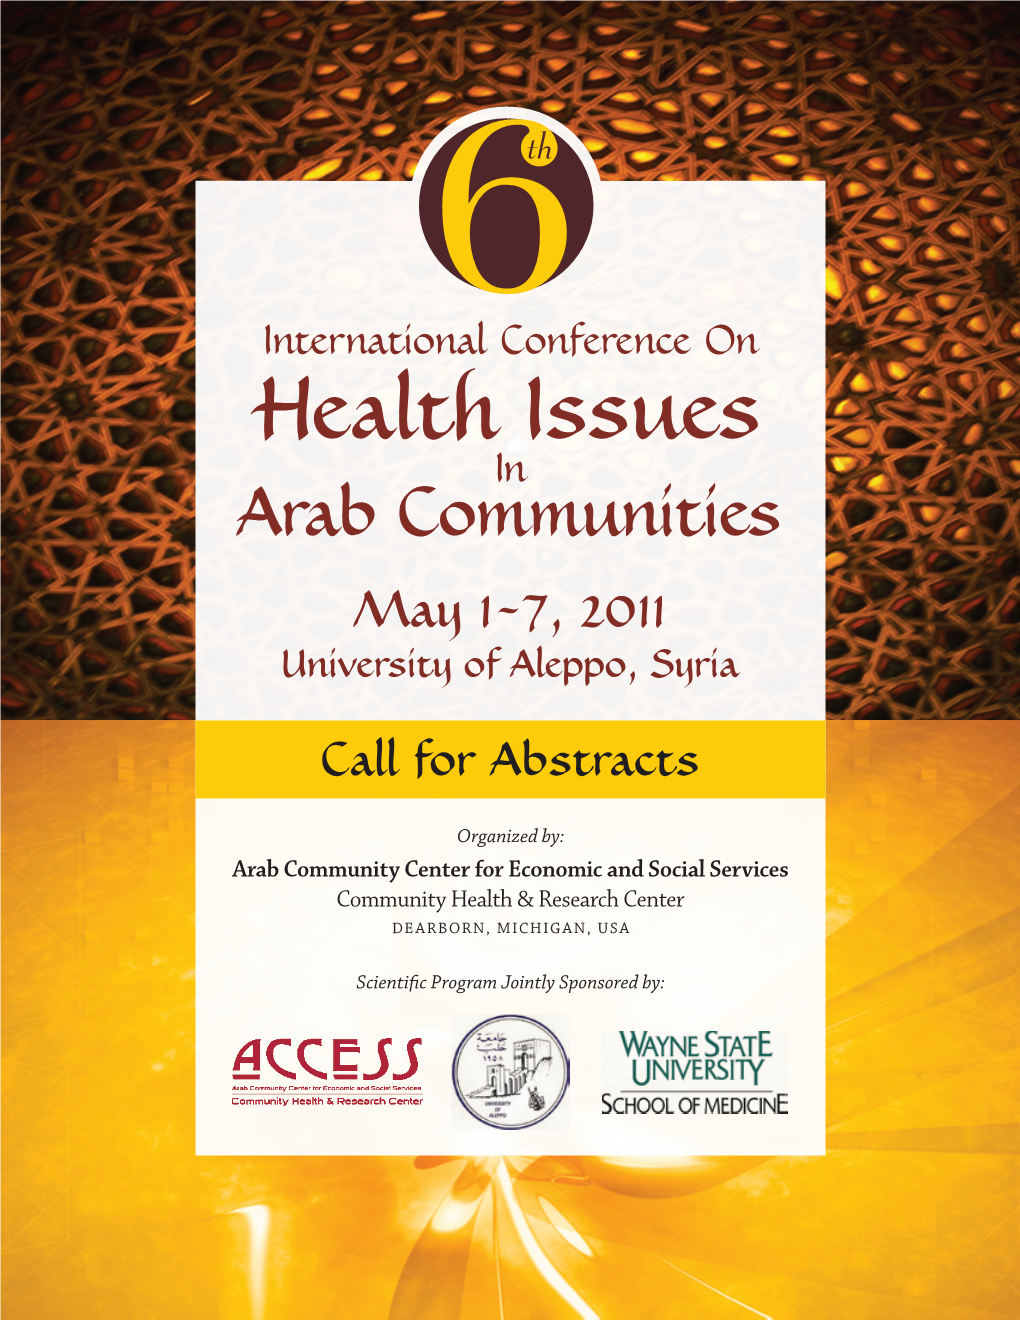 The 6Th International Conference on Health Issues in Arab Communities